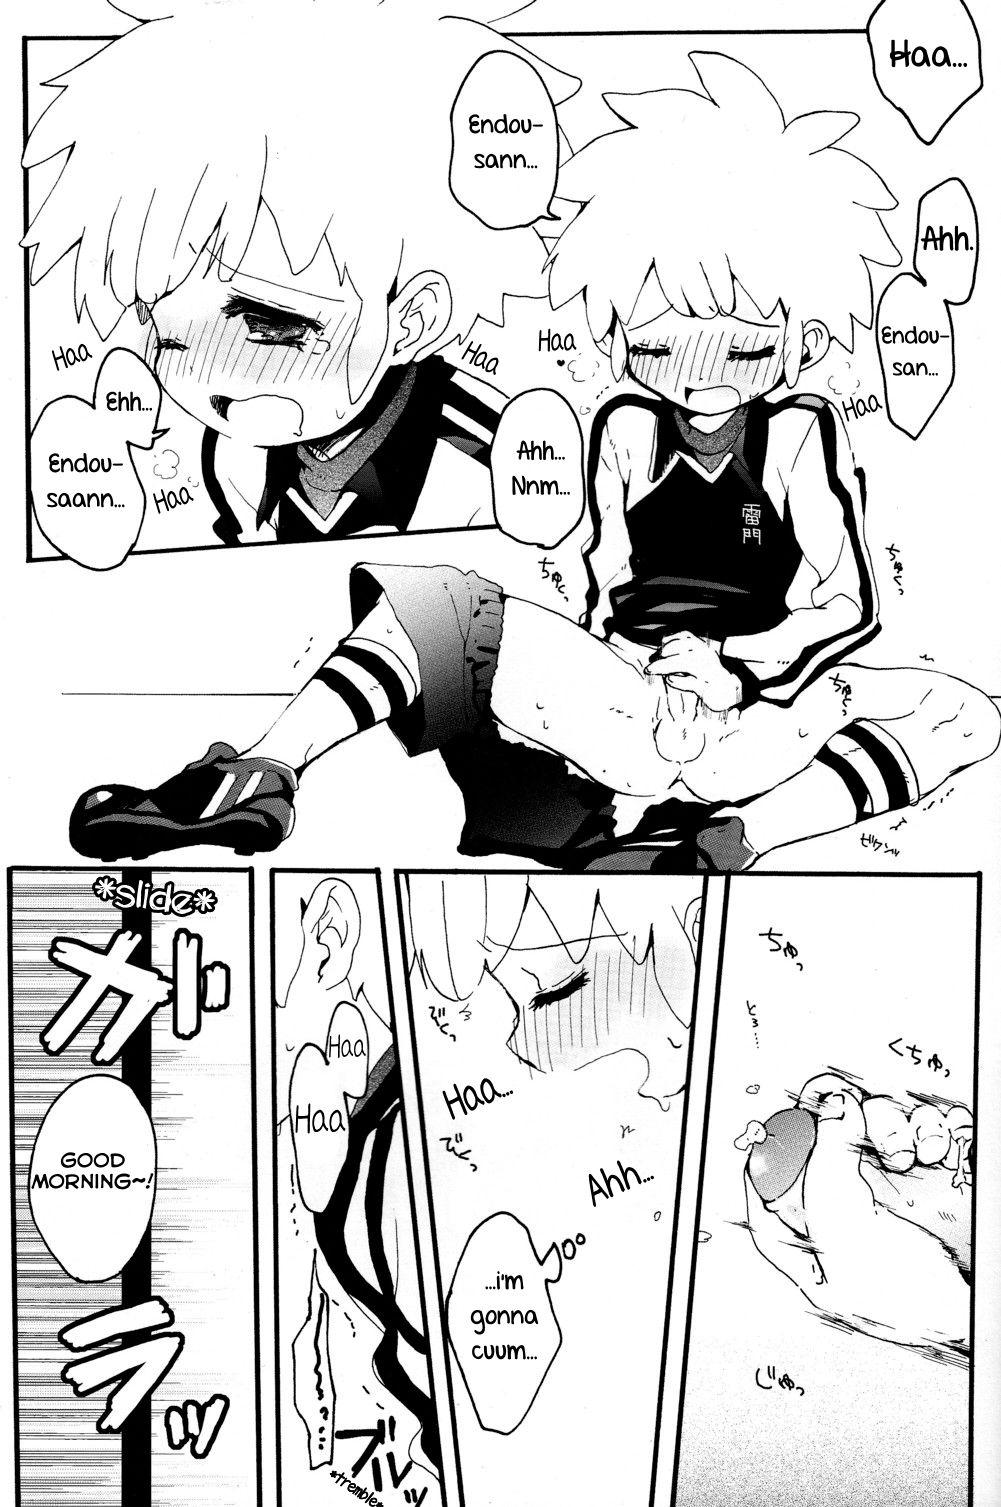 Nylons HNTC - Inazuma eleven Teen Porn - Page 2